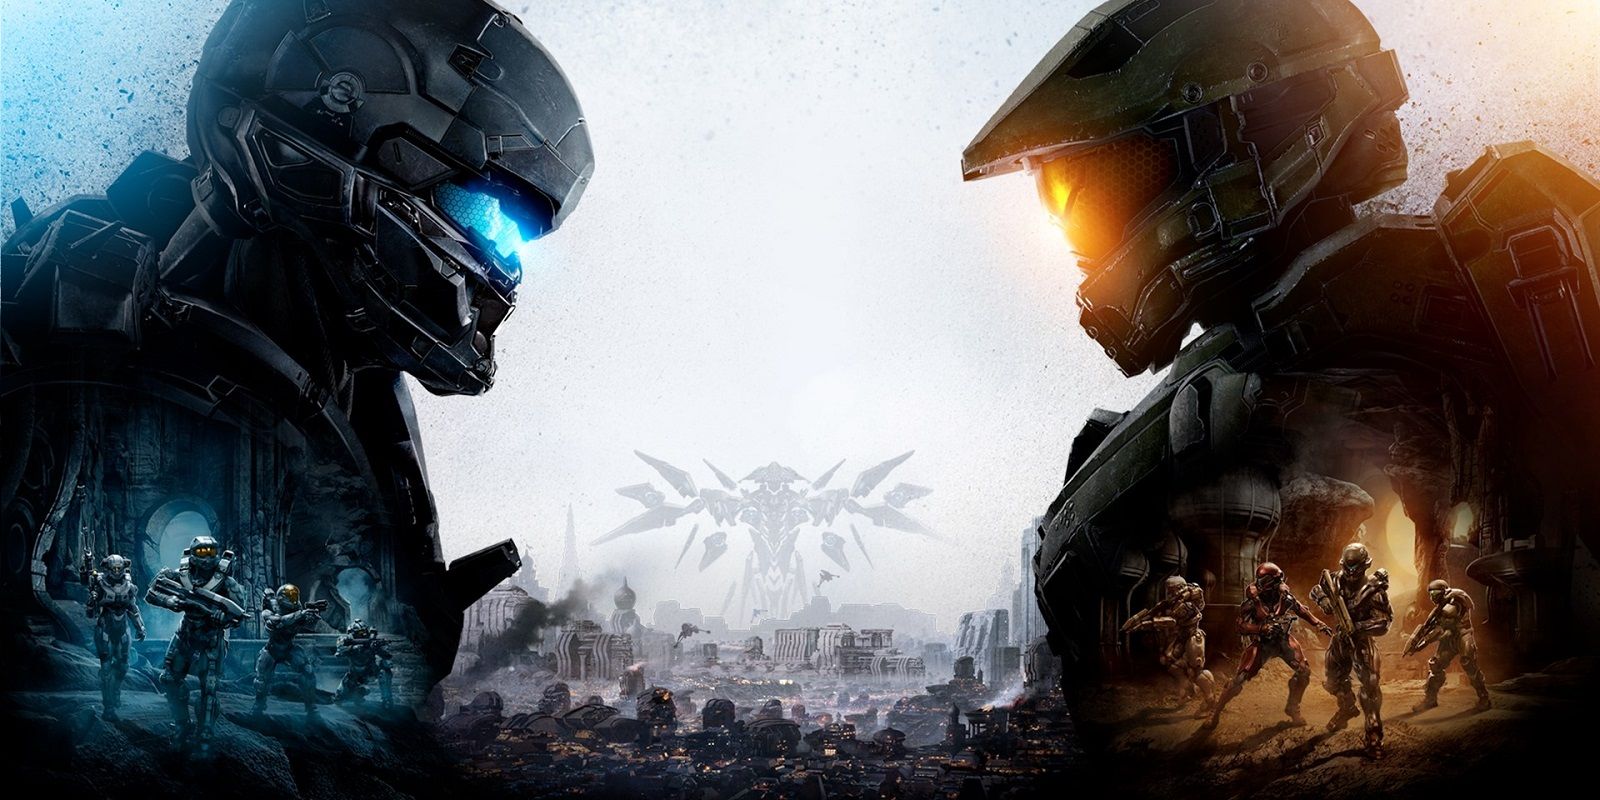 Halo 5 Guardians cover art of Spartan Locke and Master Chief facing each other